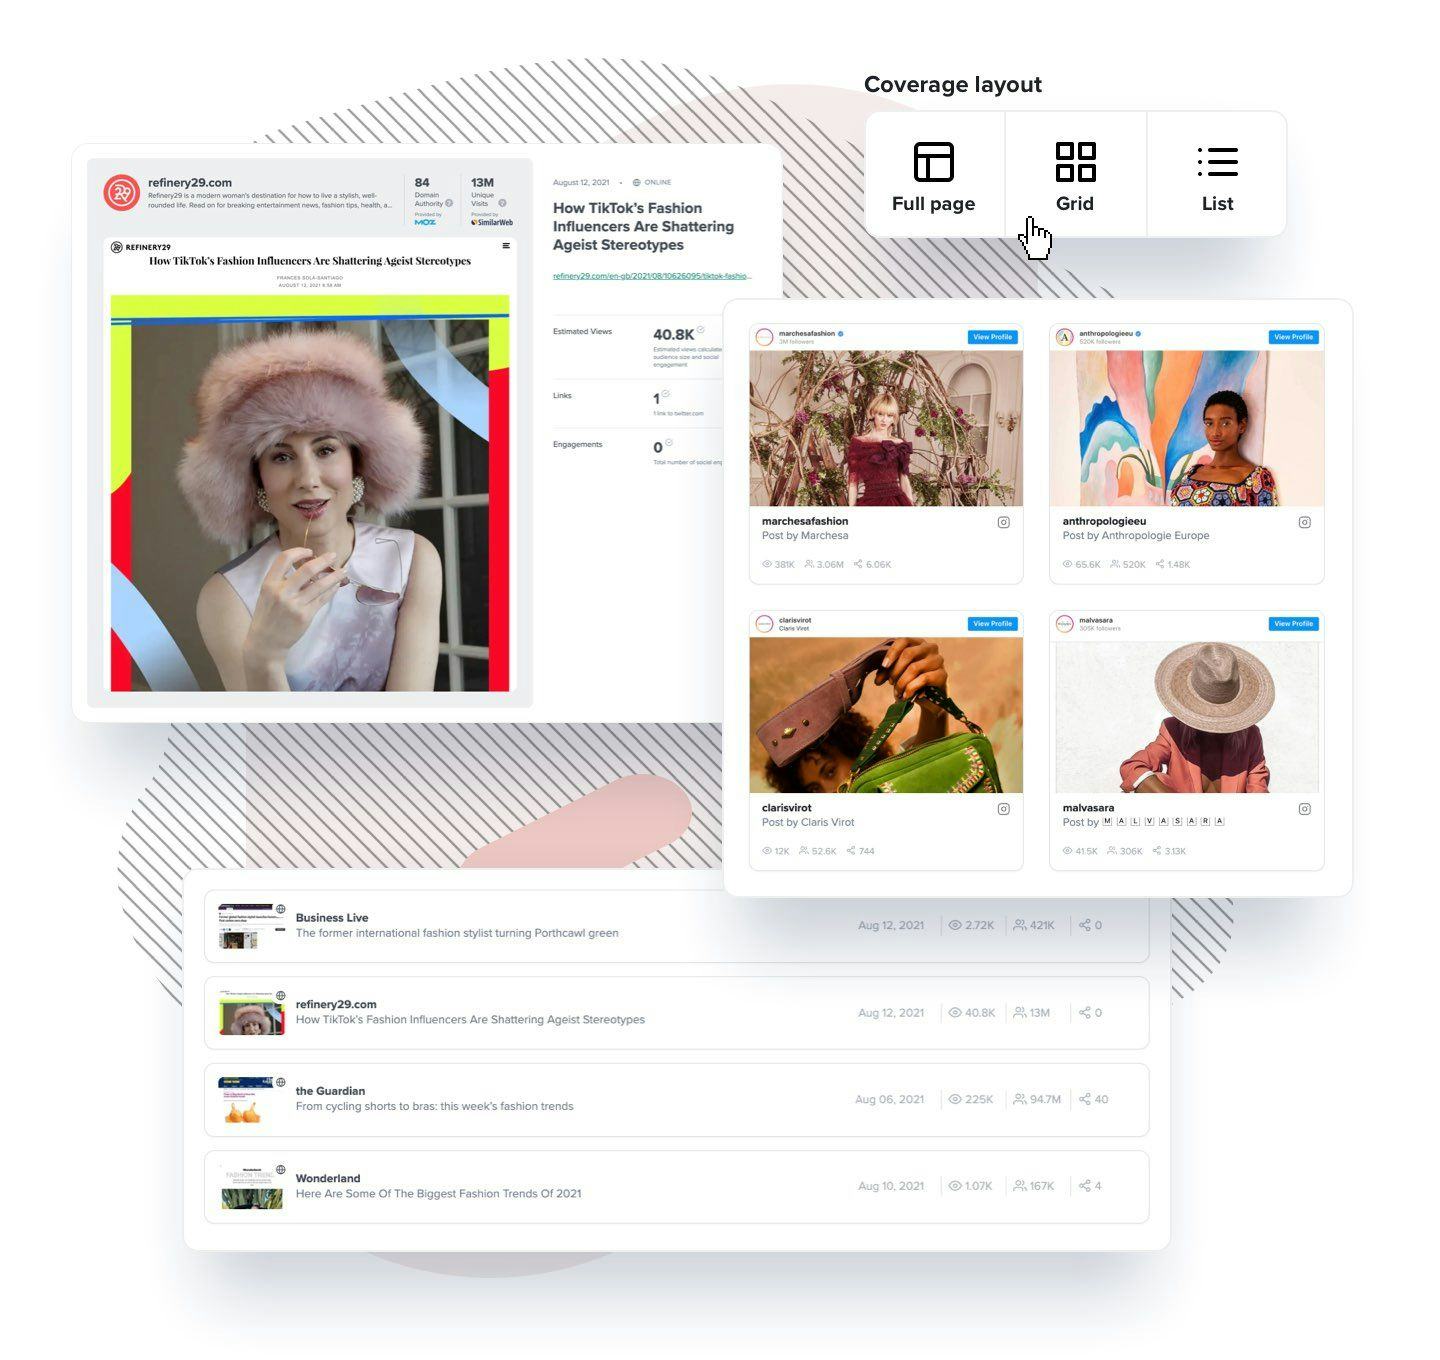 CoverageBook Software - Flexible coverage layouts to suit all stakeholders with grid, list or full views